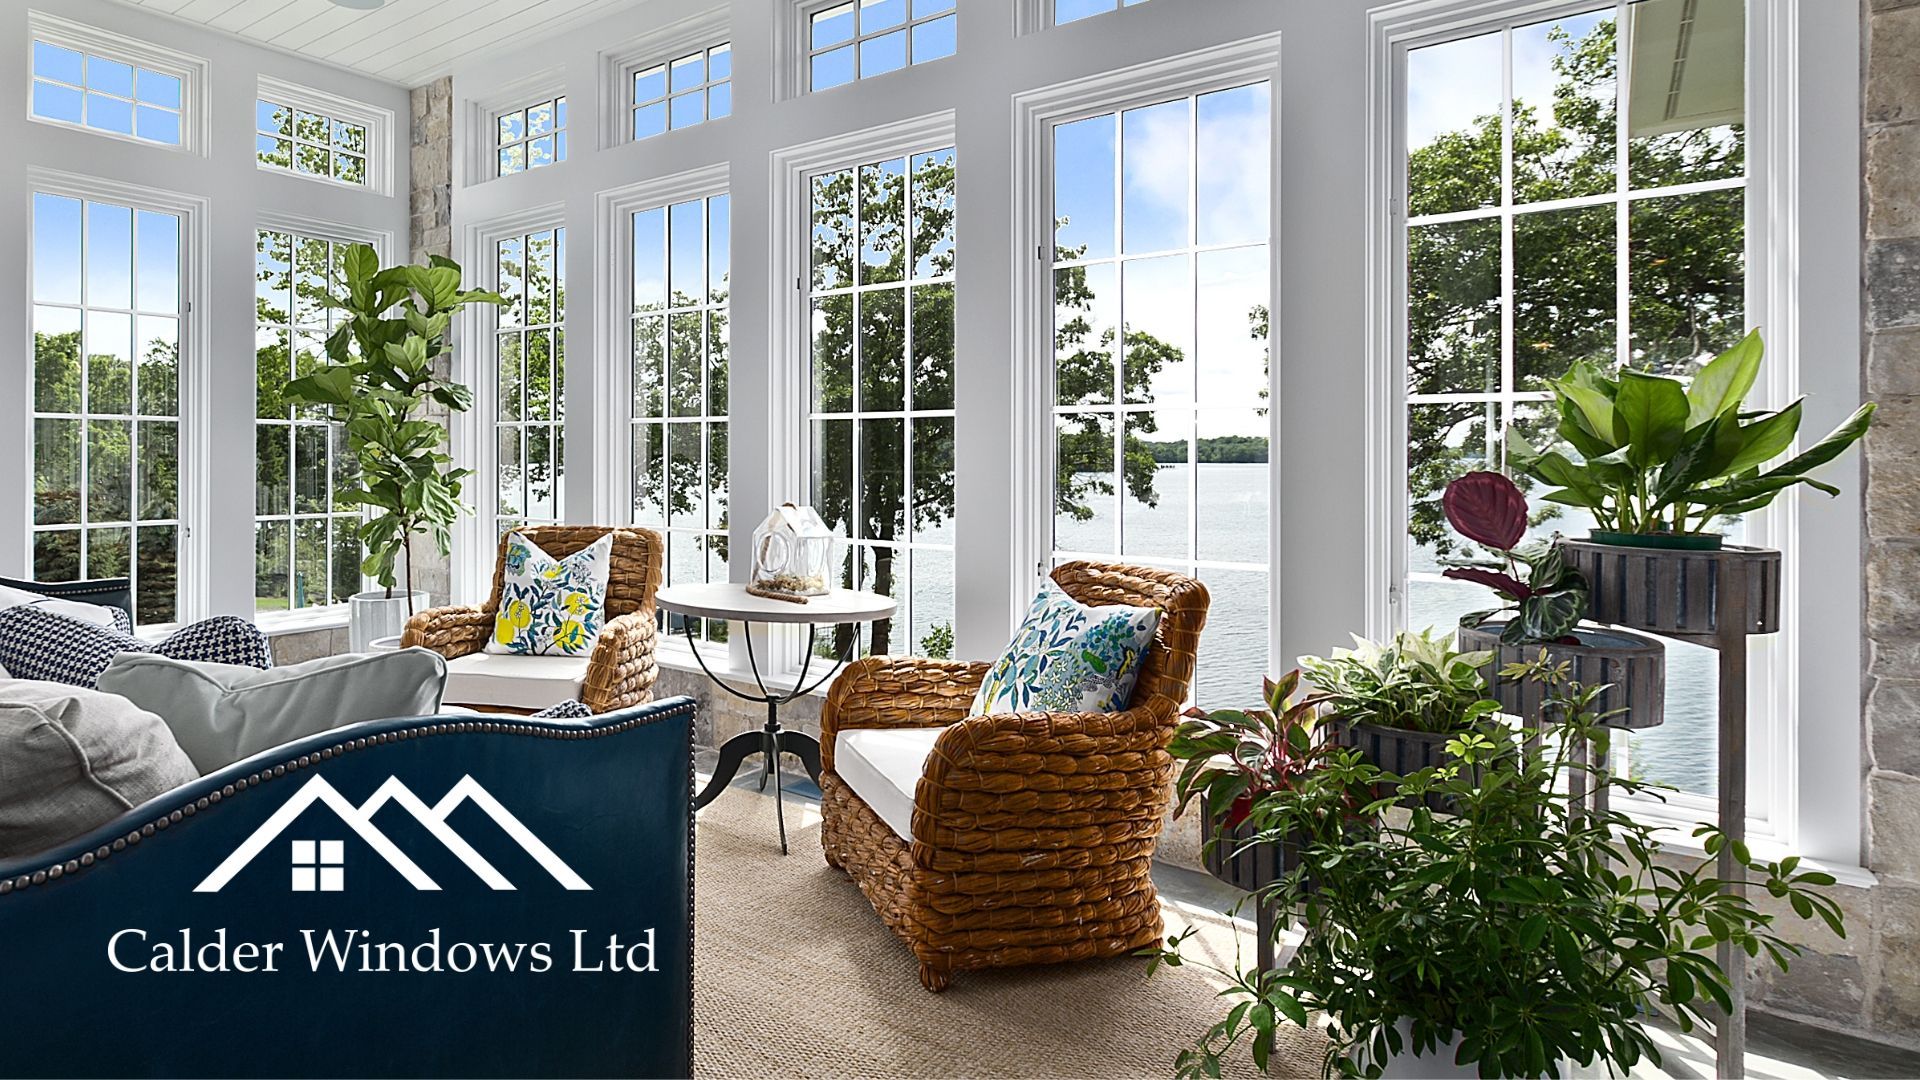 ​Your choice of windows has a big impact on the look and feel of your home. So, just how do you pick the right style for your needs? Find out in our guide.
